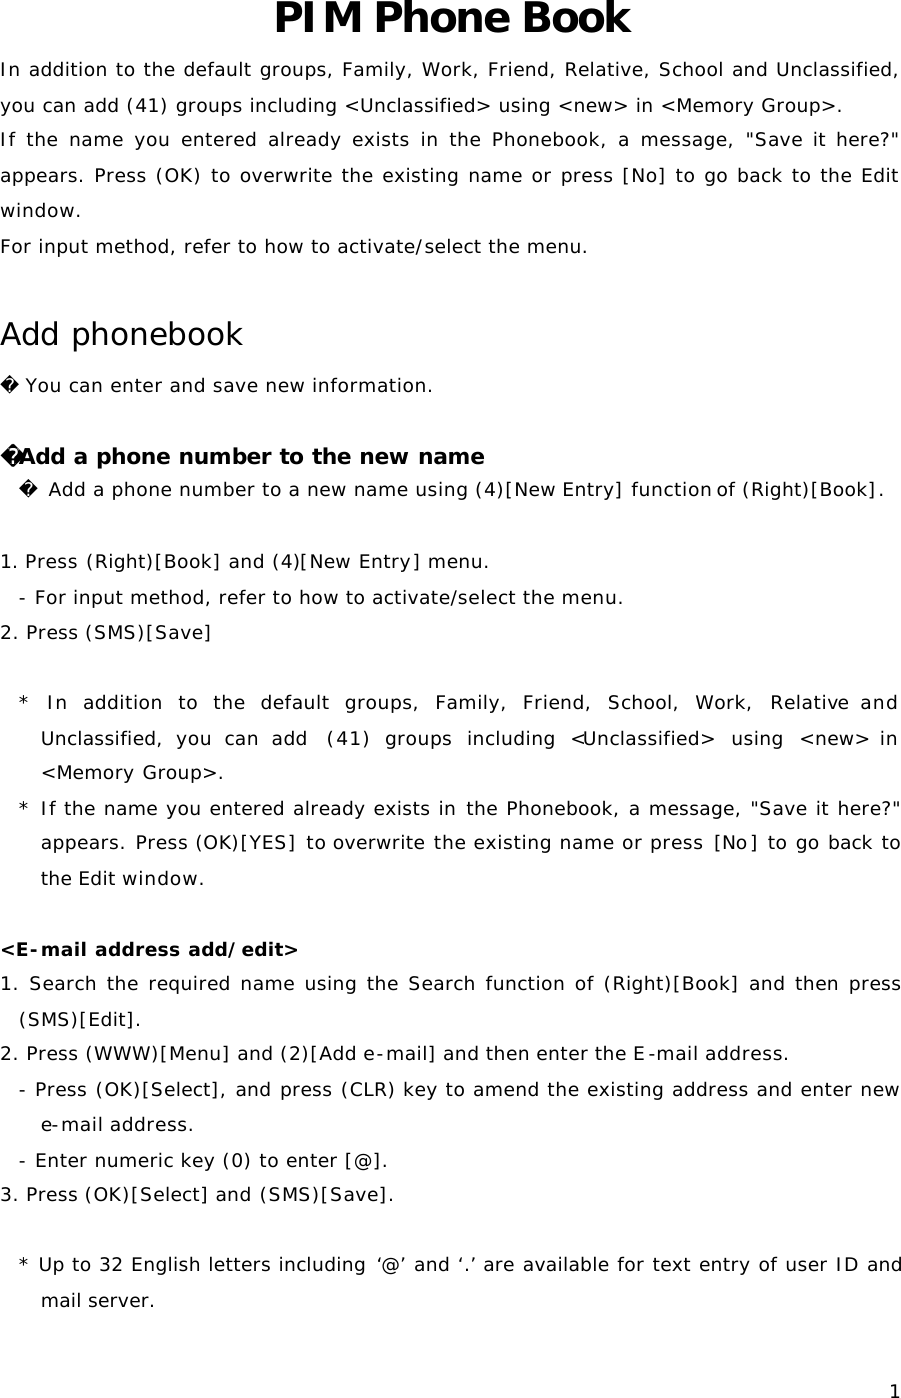  1PIM Phone Book In addition to the default groups, Family, Work, Friend, Relative, School and Unclassified, you can add (41) groups including &lt;Unclassified&gt; using &lt;new&gt; in &lt;Memory Group&gt;. If the name you entered already exists in the Phonebook, a message, &quot;Save it here?&quot; appears. Press (OK) to overwrite the existing name or press [No] to go back to the Edit window. For input method, refer to how to activate/select the menu.  Add phonebook  You can enter and save new information.  Add a phone number to the new name  Add a phone number to a new name using (4)[New Entry] function of (Right)[Book].  1. Press (Right)[Book] and (4)[New Entry] menu. - For input method, refer to how to activate/select the menu. 2. Press (SMS)[Save]  *  In addition to the default groups, Family, Friend, School, Work, Relative and Unclassified, you can add  (41) groups including &lt;Unclassified&gt; using &lt;new&gt; in &lt;Memory Group&gt;. * If the name you entered already exists in the Phonebook, a message, &quot;Save it here?&quot; appears. Press (OK)[YES] to overwrite the existing name or press [No] to go back to the Edit window.  &lt;E-mail address add/edit&gt; 1. Search the required name using the Search function of (Right)[Book] and then press (SMS)[Edit]. 2. Press (WWW)[Menu] and (2)[Add e-mail] and then enter the E-mail address. - Press (OK)[Select], and press (CLR) key to amend the existing address and enter new e-mail address. - Enter numeric key (0) to enter [@]. 3. Press (OK)[Select] and (SMS)[Save].  * Up to 32 English letters including ‘@’ and ‘.’ are available for text entry of user ID and mail server.  